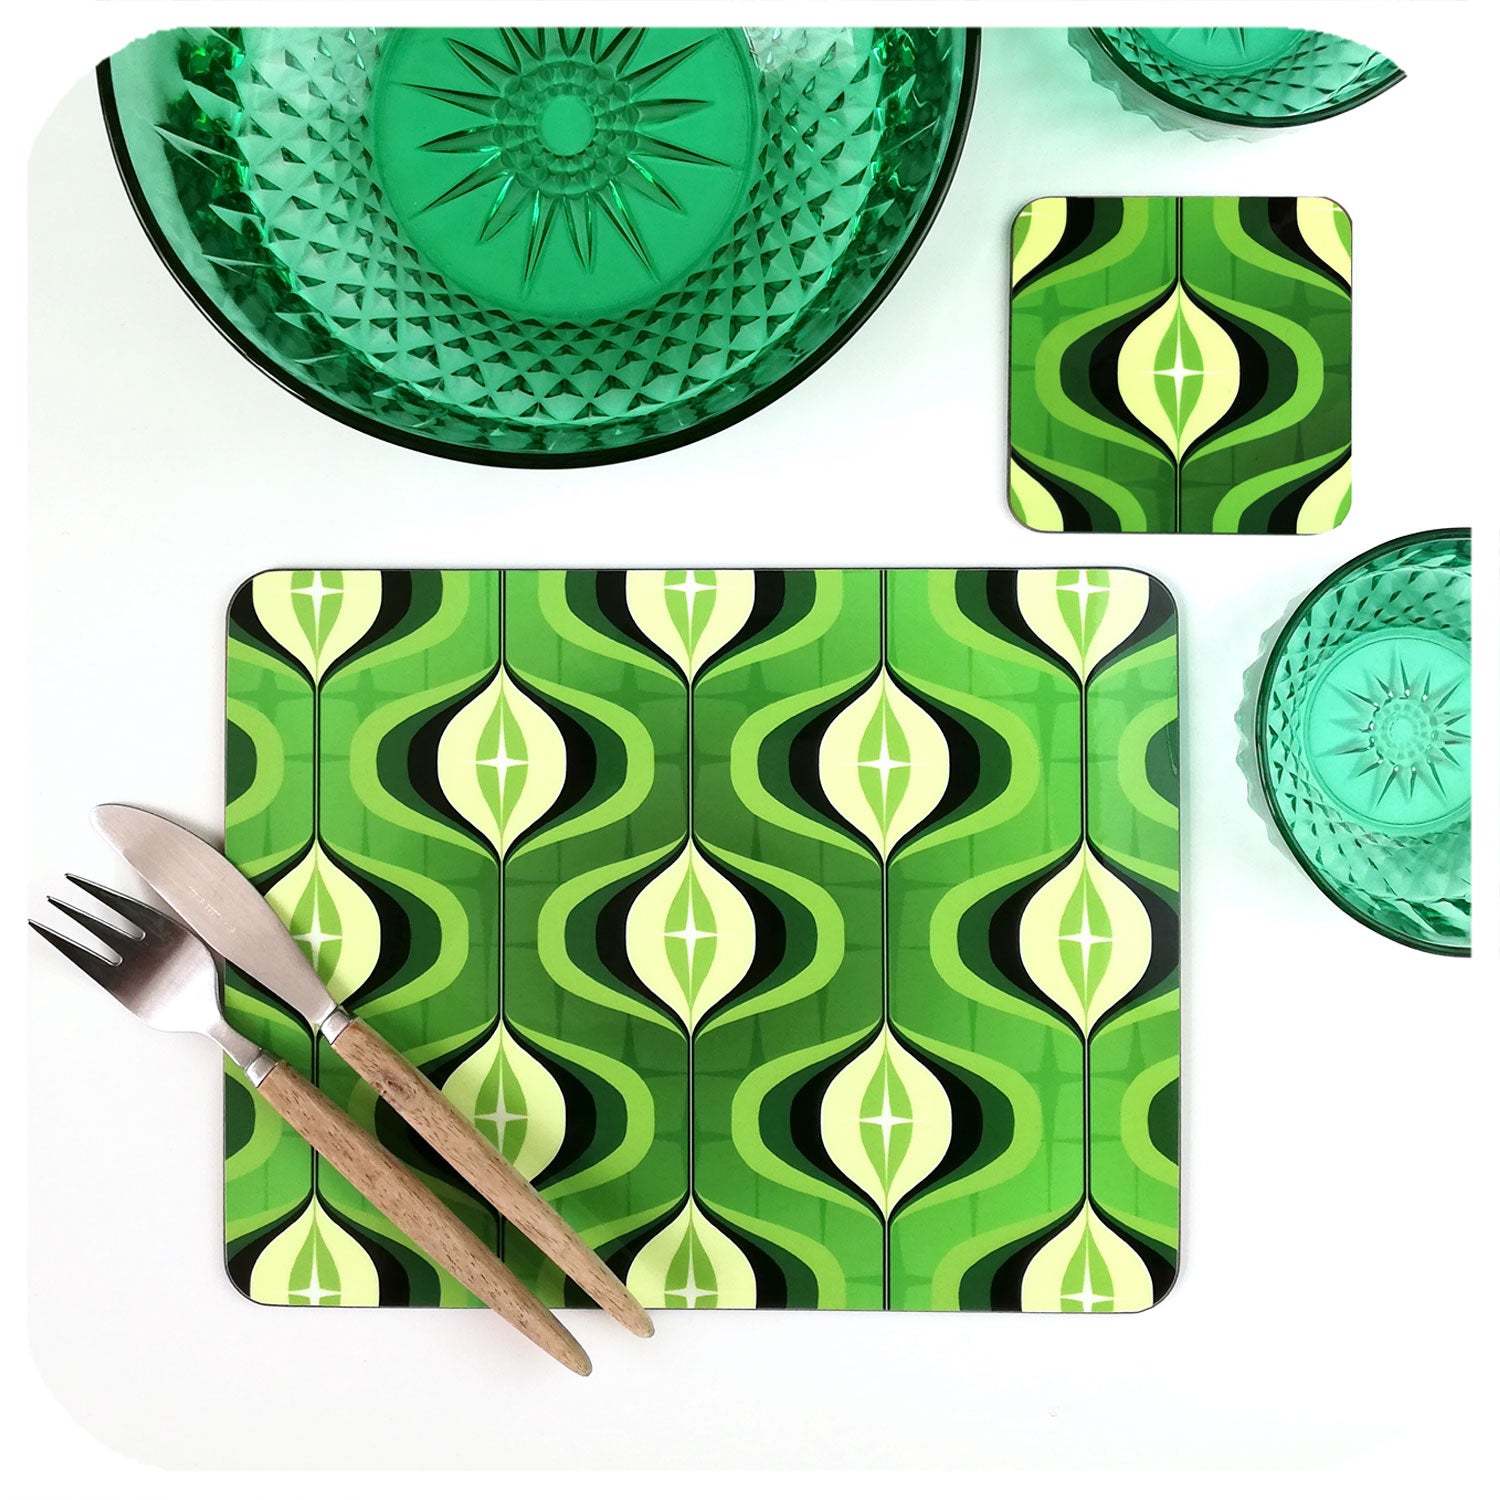 1970s Op Art Placemat and matching coaster in green | The Inkabilly Emporium